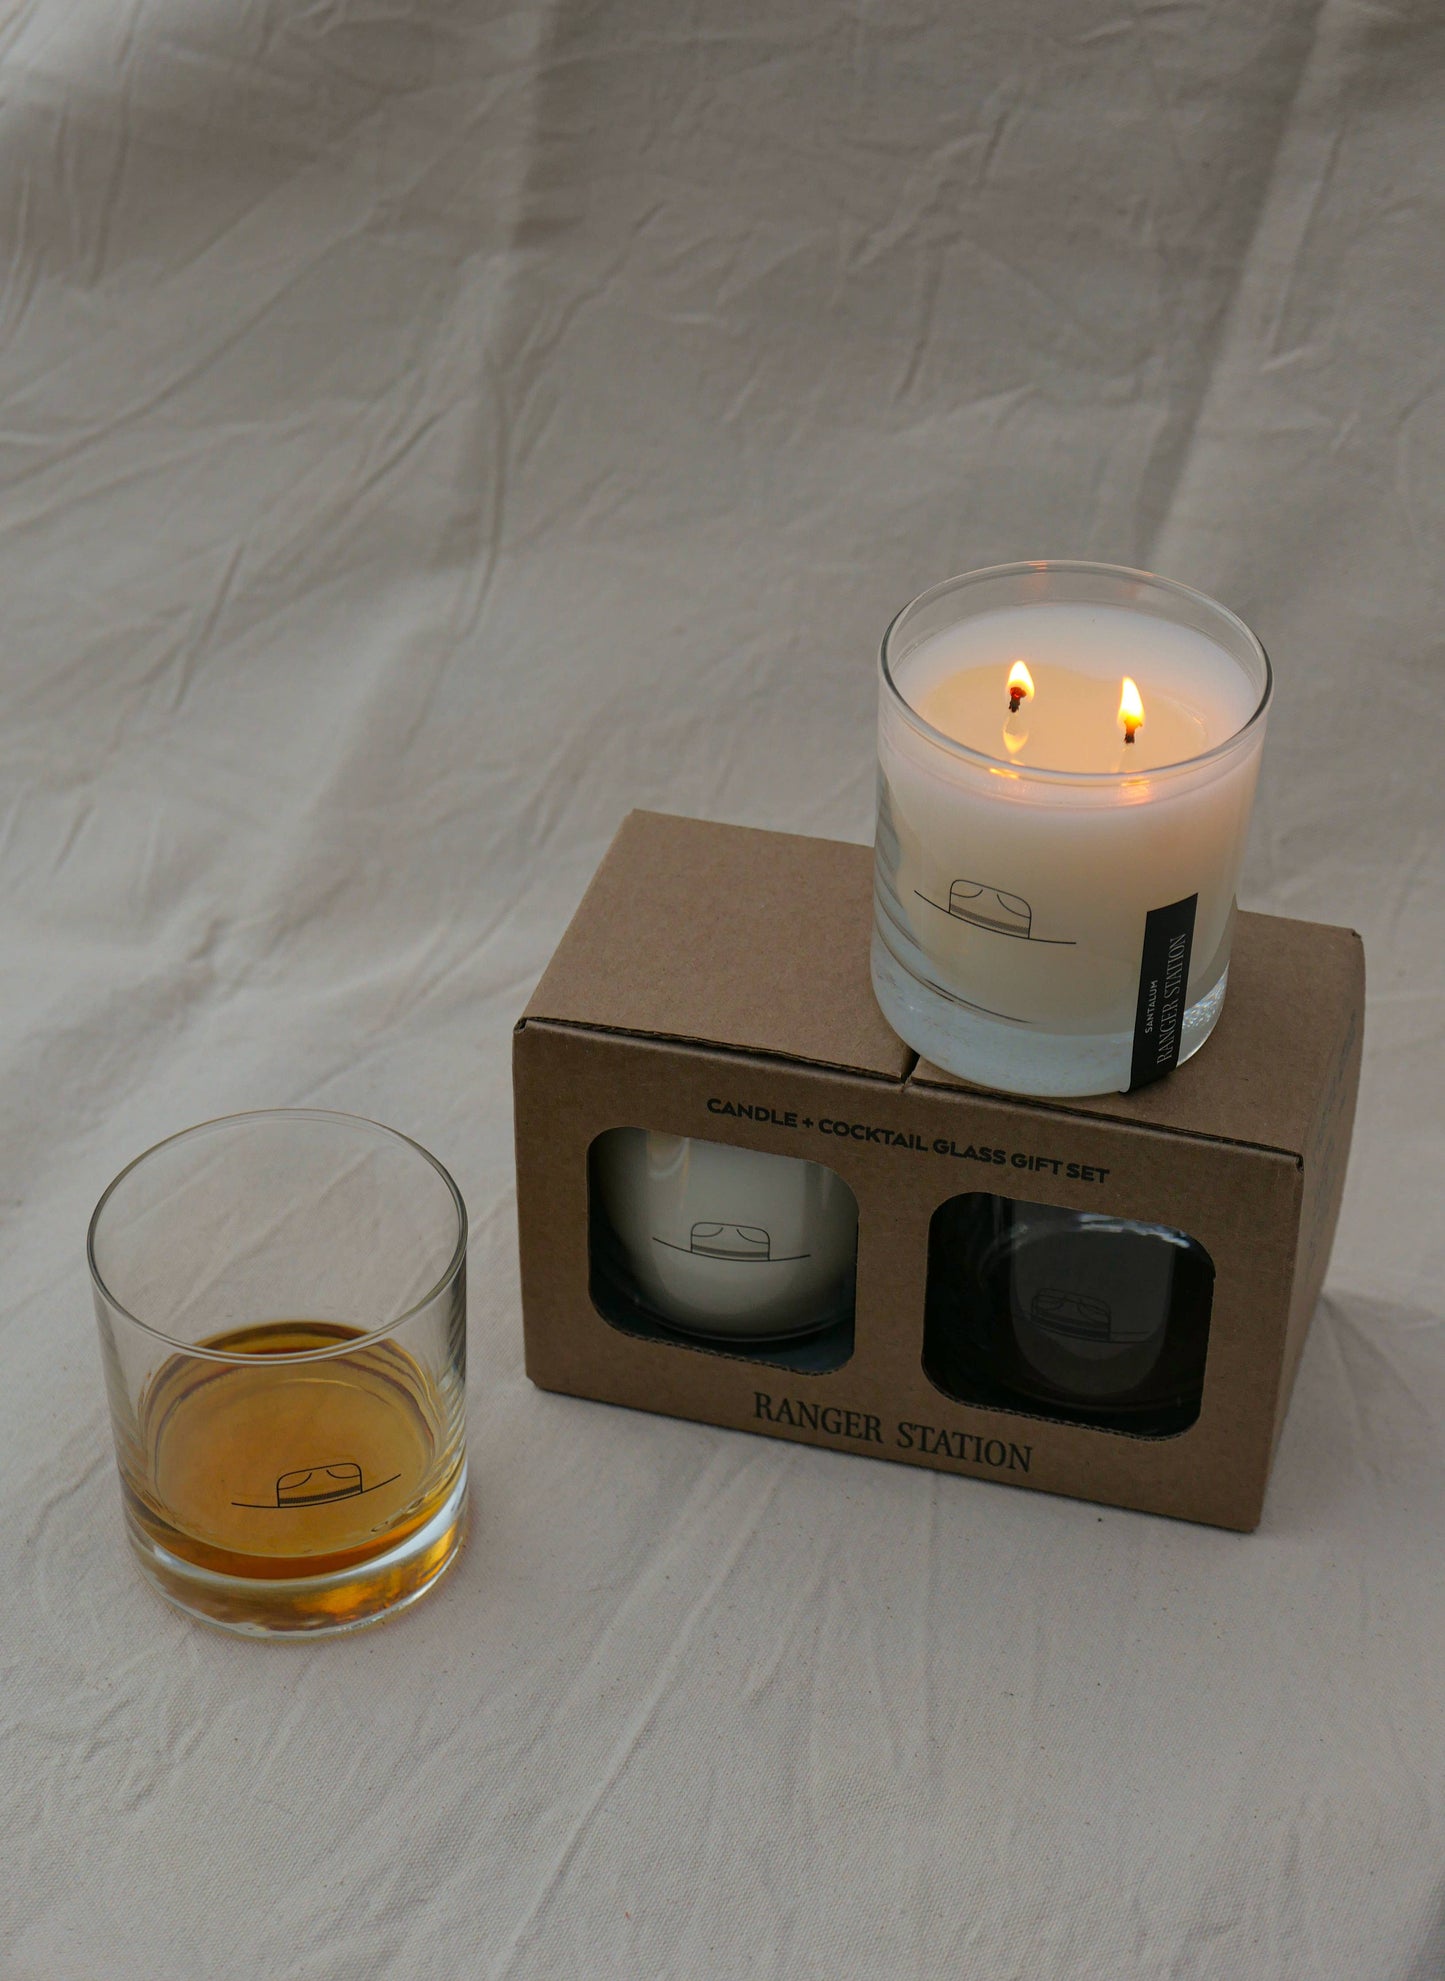 CANDLE + COCKTAIL GLASS GIFT SET: OLD FASHIONED